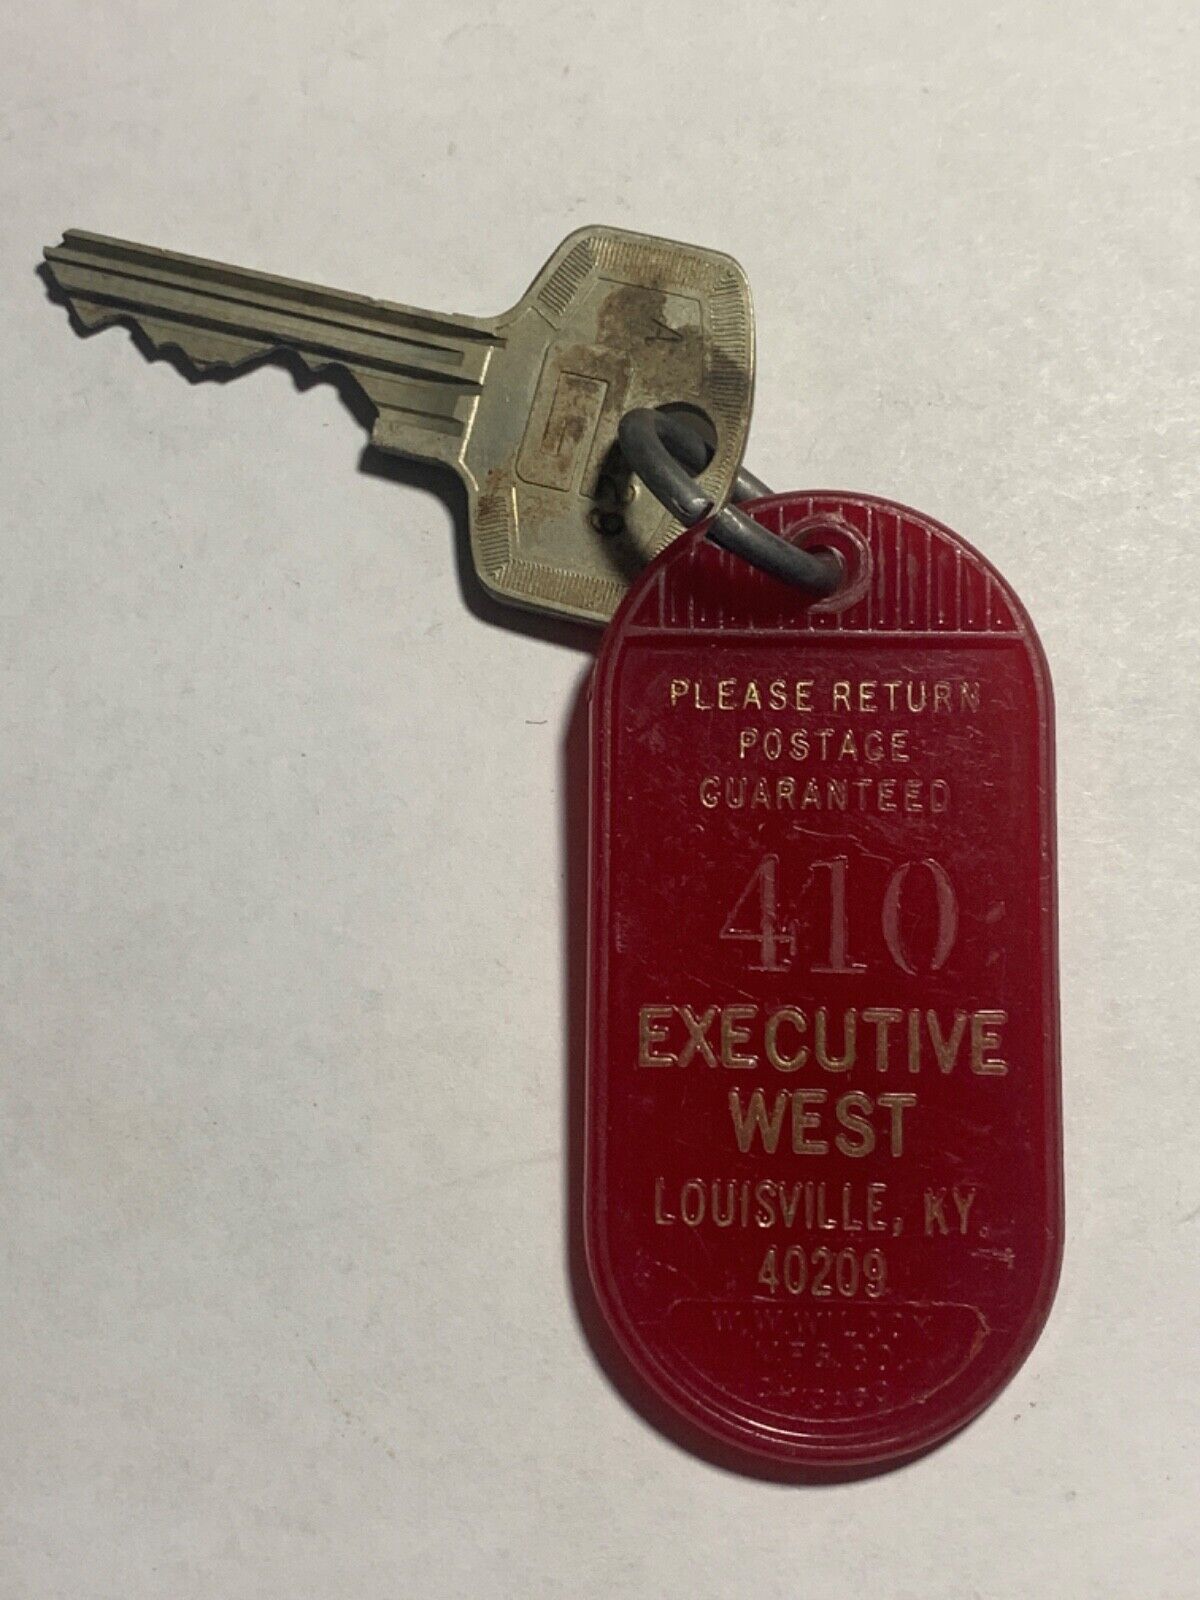 Executive West Hotel Motel Room Key Fob with Key Louisville Kentucky #410